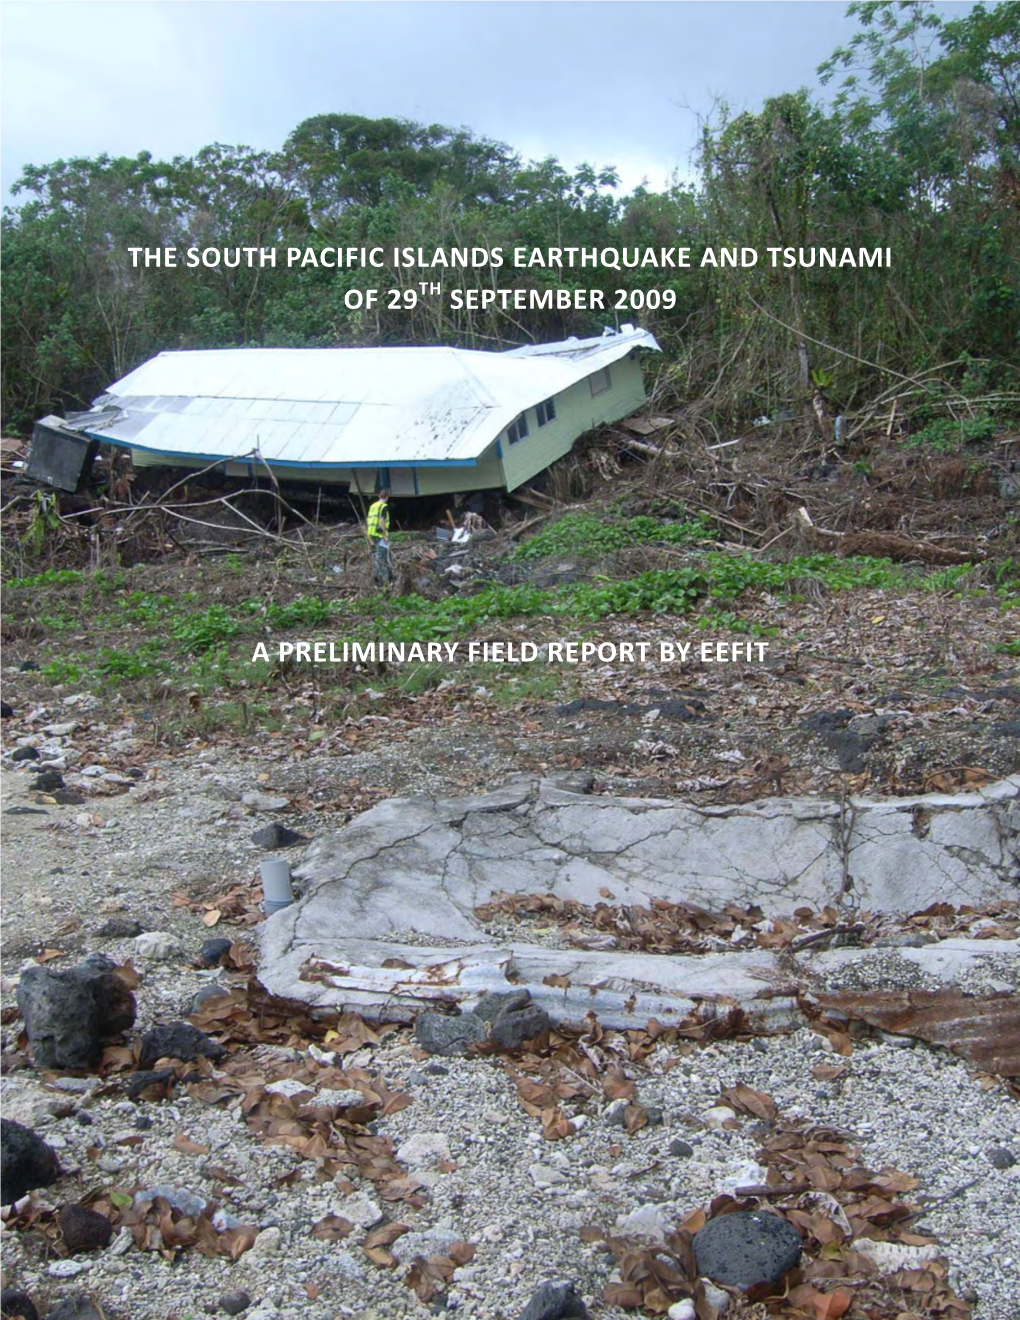 The South Pacific Islands Earthquake and Tsunami of 29Th September 2009